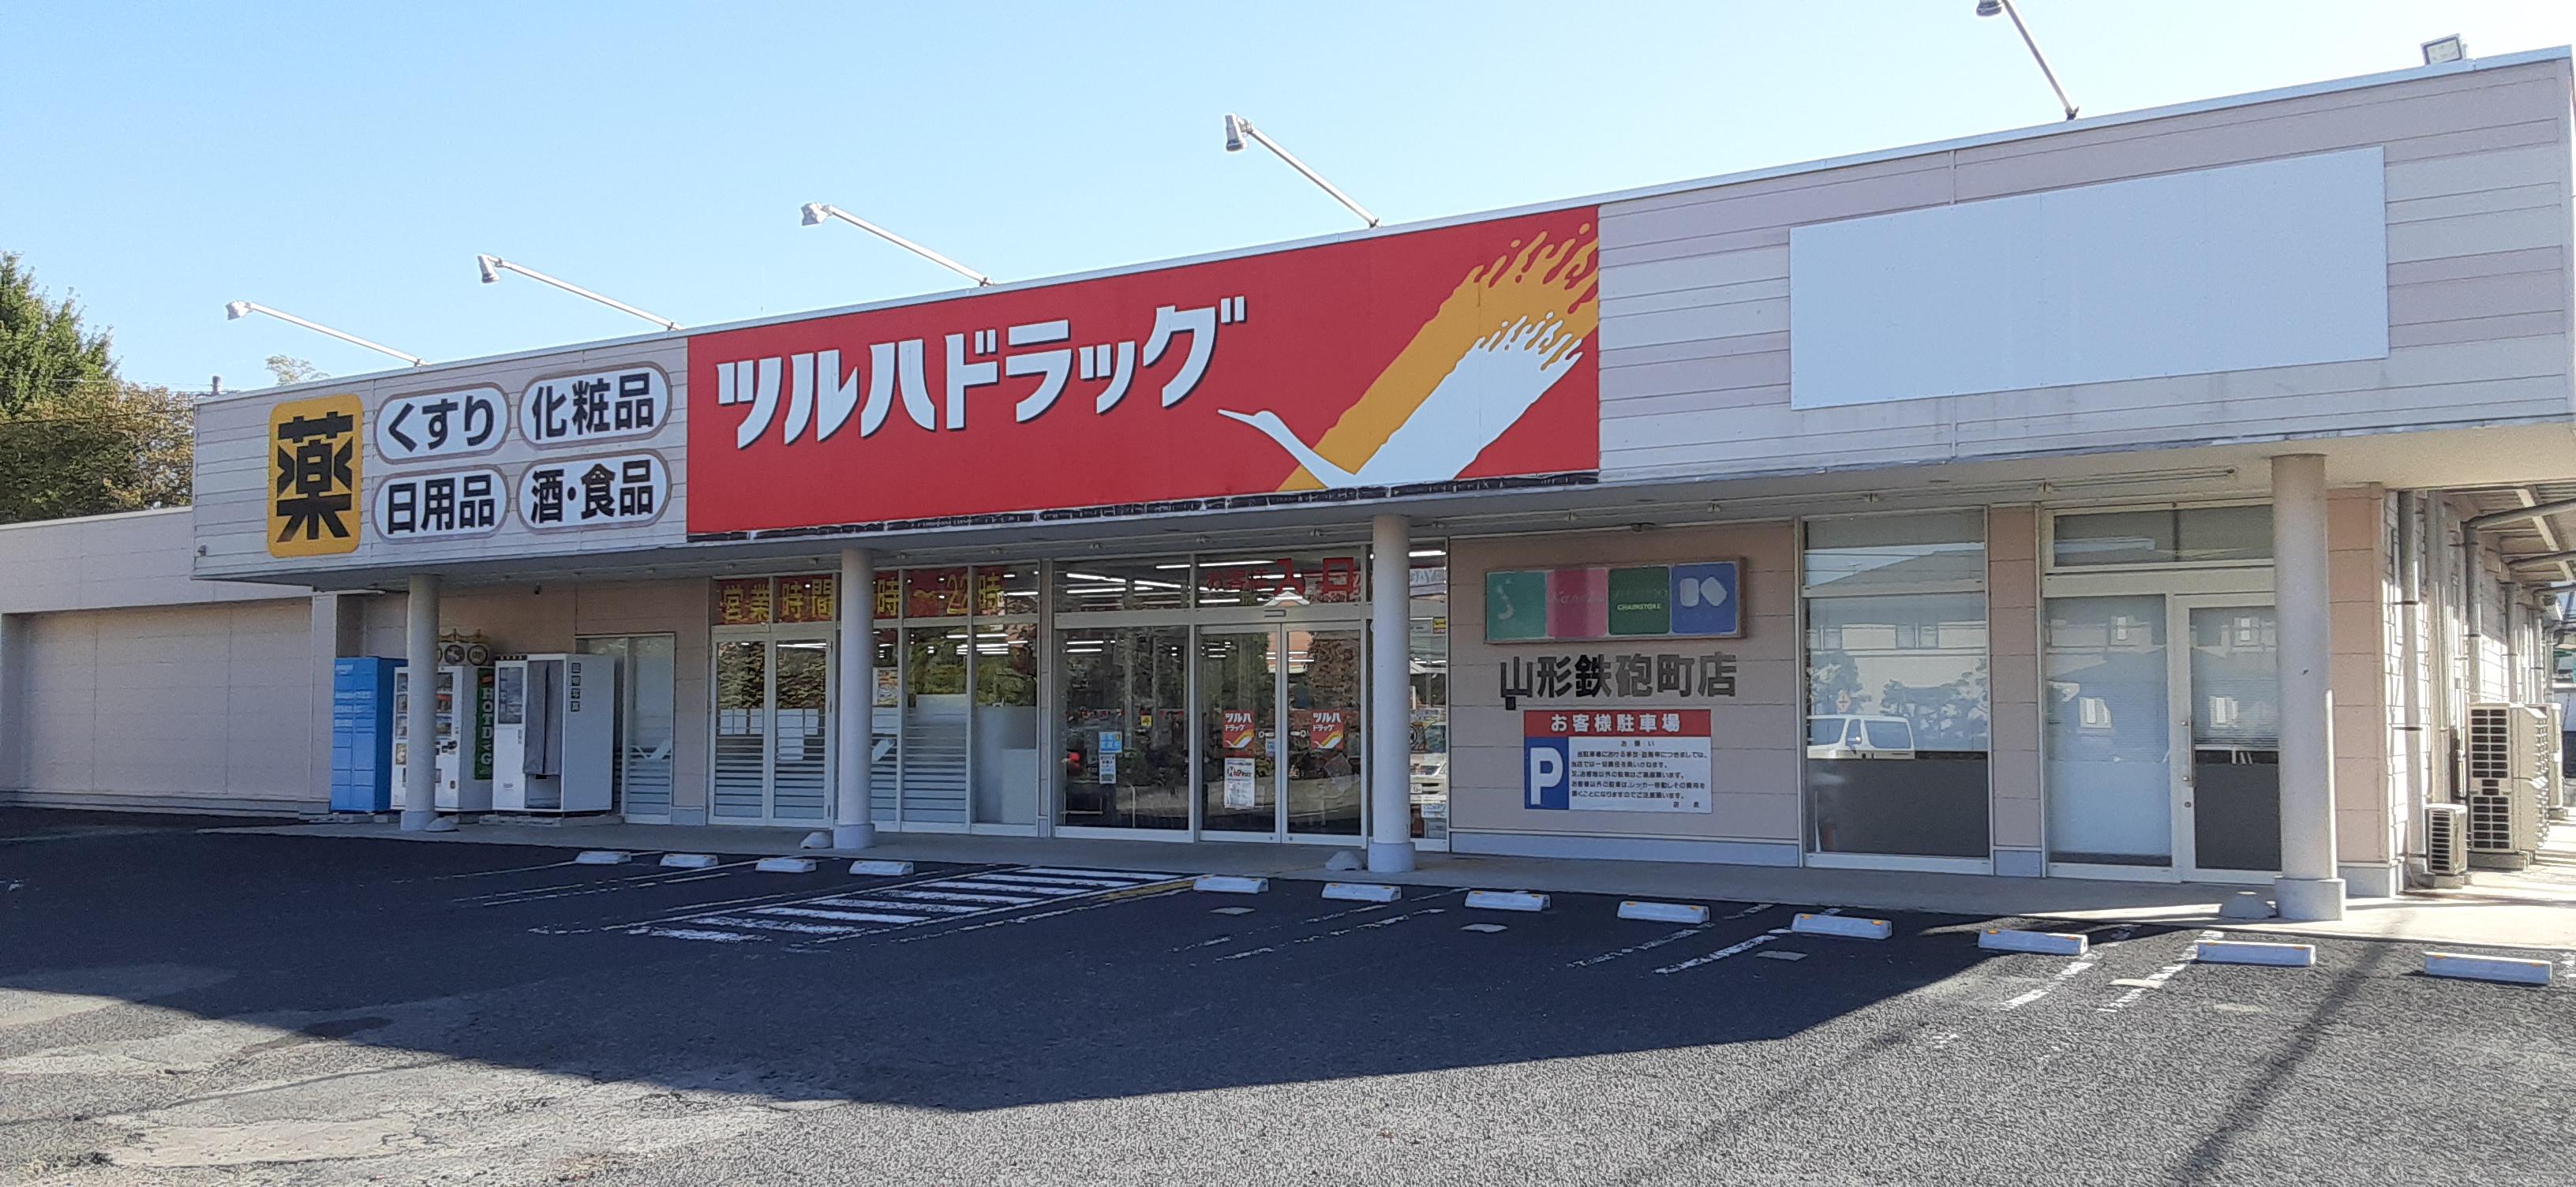 Images ツルハドラッグ 山形鉄砲町店